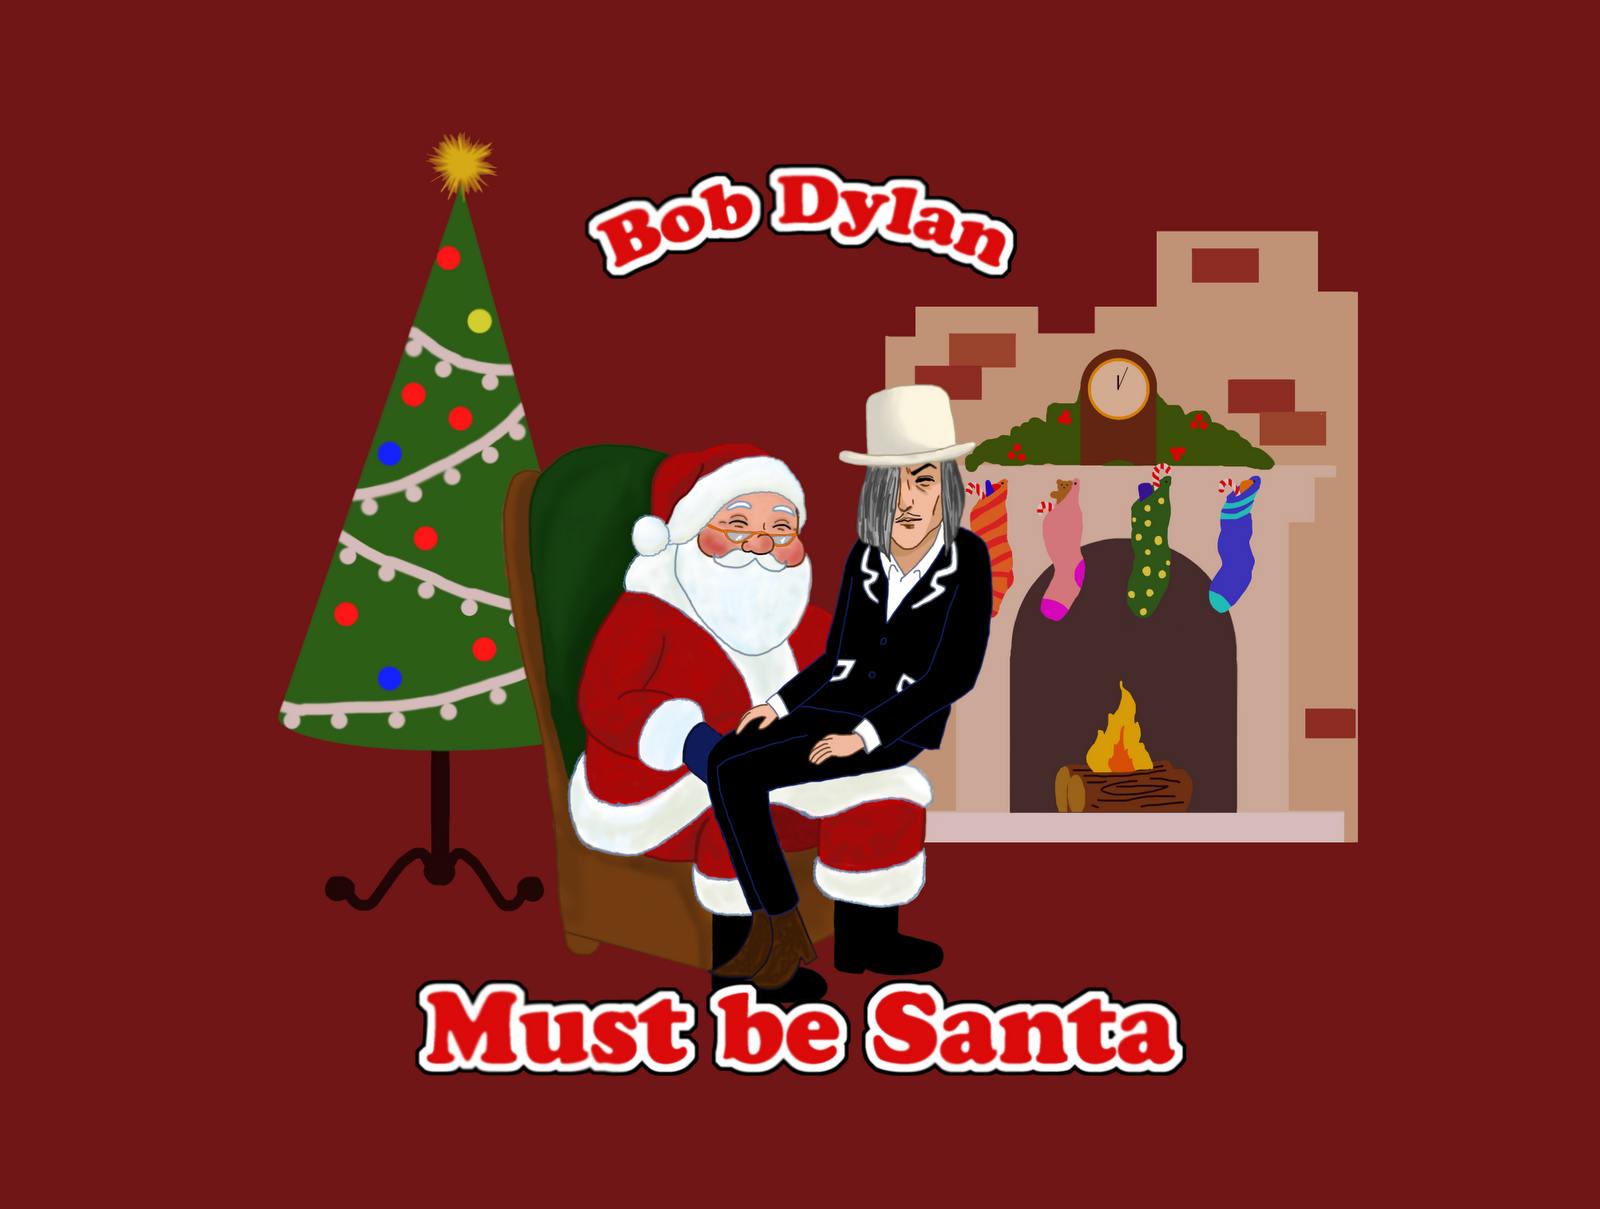 bob dylan christamas in the heart download torrent